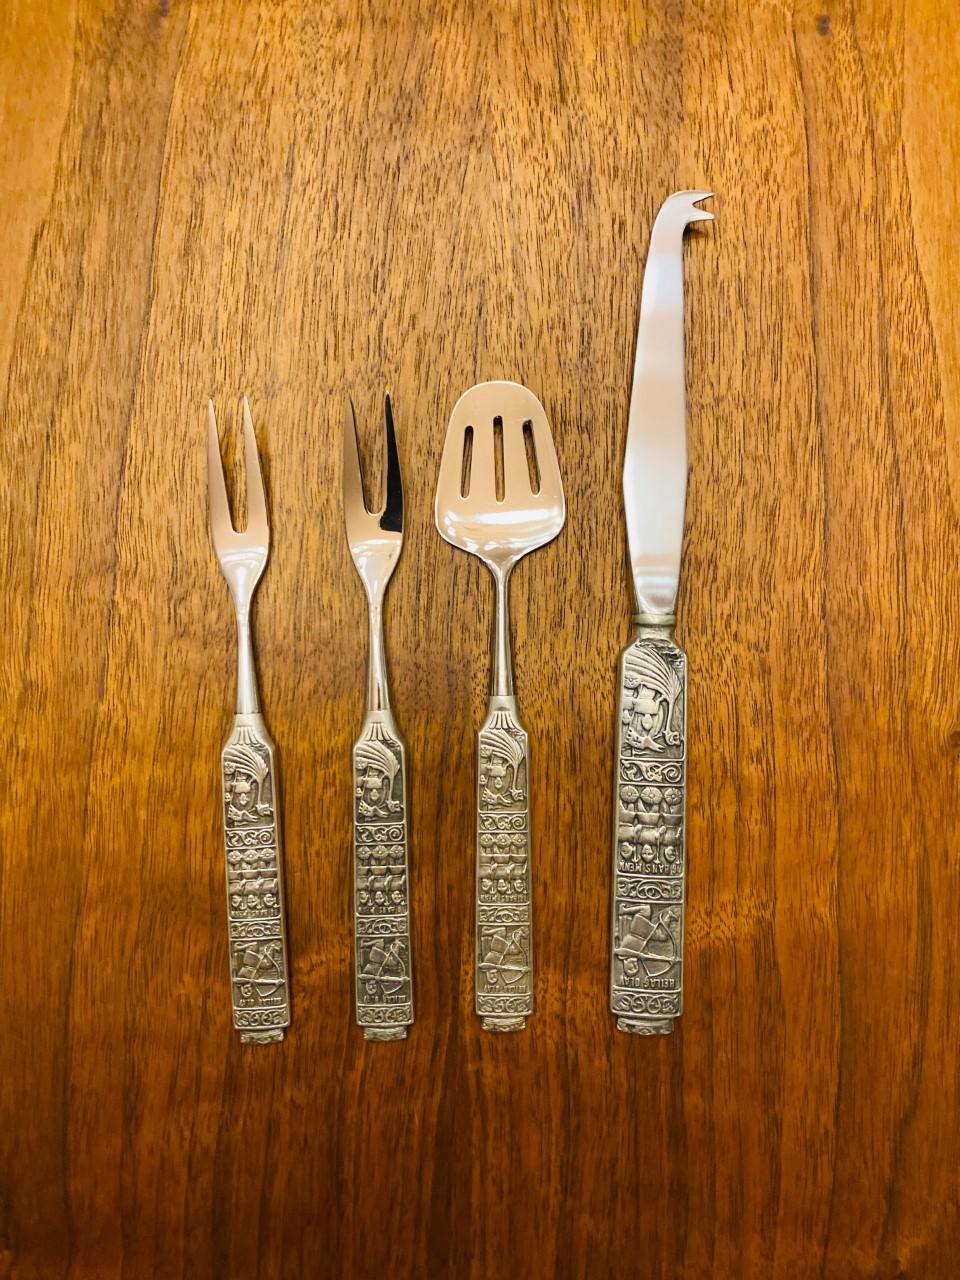 Beautiful set of 4, original-boxed, serving and entertaining flatware from Konge-Tinn. This “Royal Pewter” set includes the well cataloged pattern on utensils that describes events that took place in Norway hundreds of years ago. “Olav the Holy and